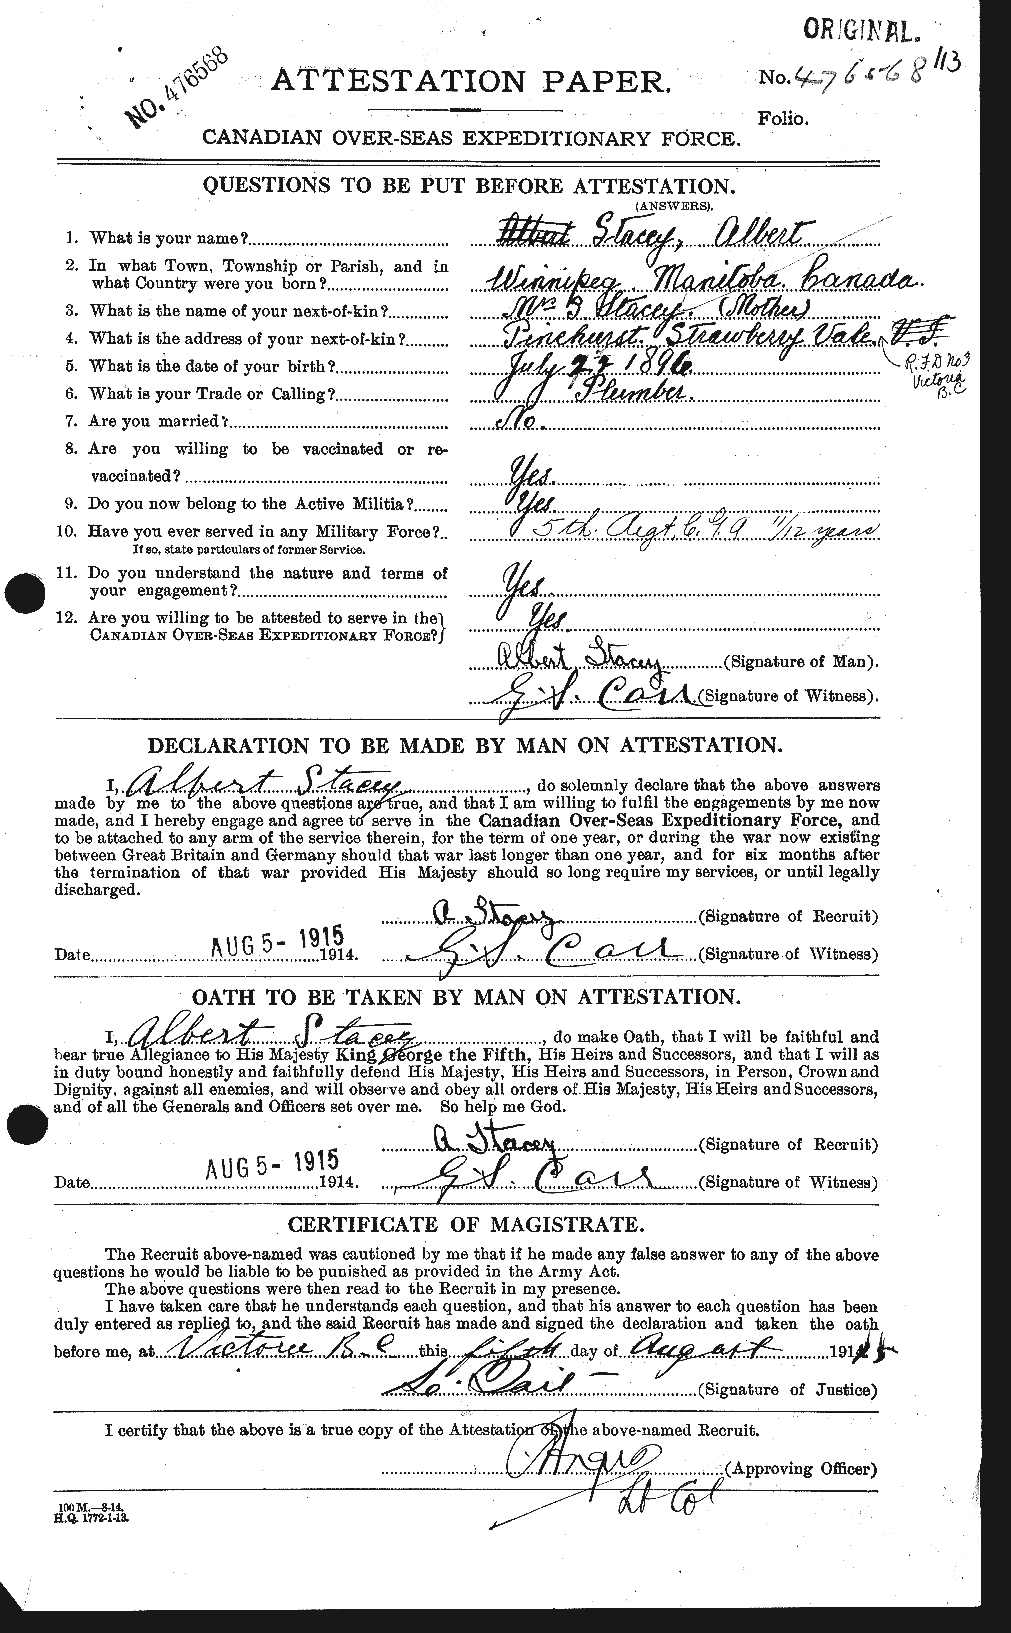 Personnel Records of the First World War - CEF 114073a